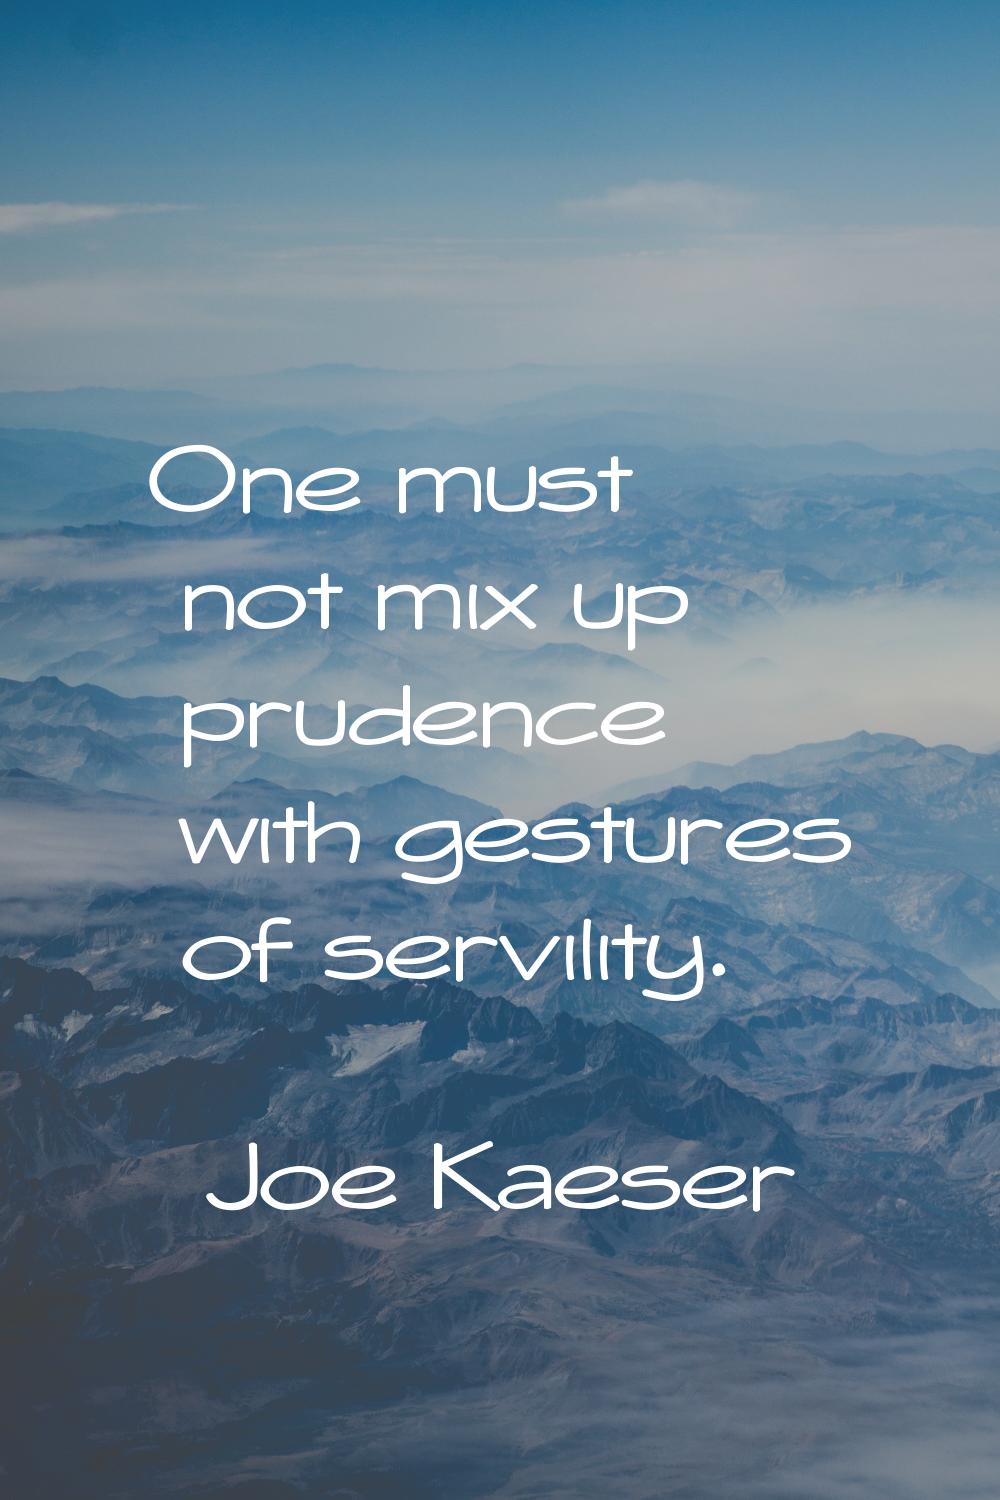 One must not mix up prudence with gestures of servility.